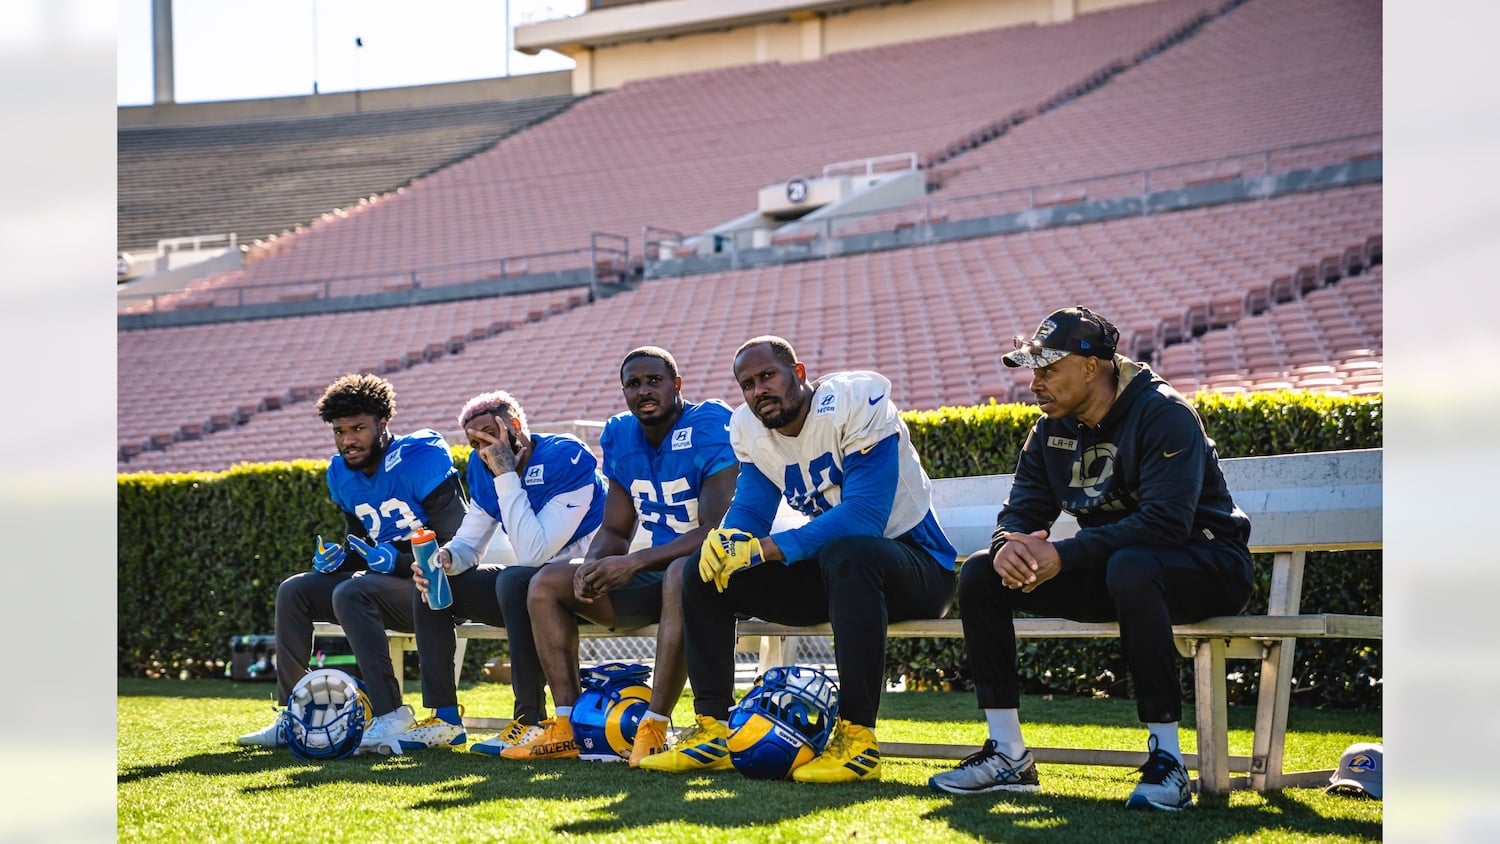 Los Angeles Rams Practice At The Rose Bowl Leading Up To The Super Bowl. Photo Credit: Brevin Townsell | LA Rams | Los Angeles Rams